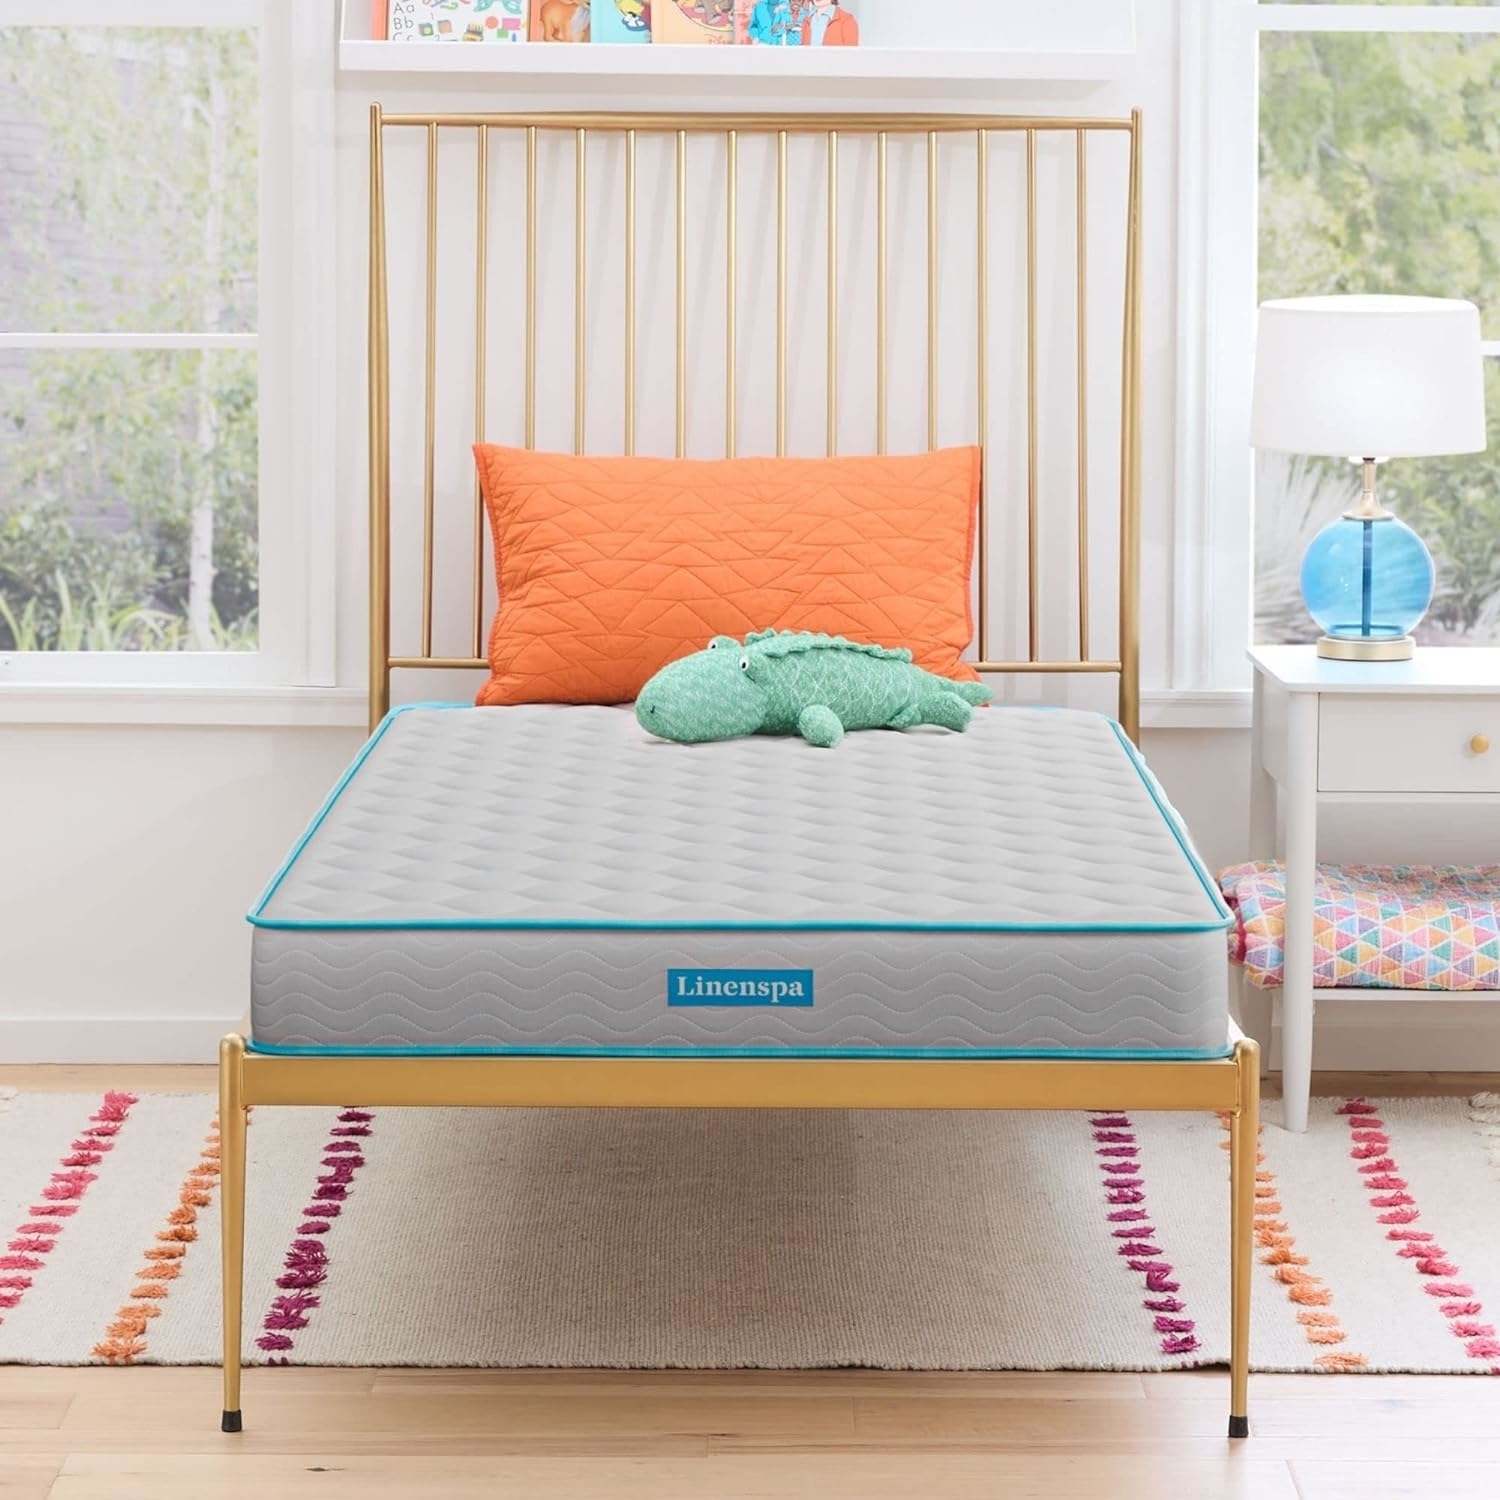 Mattress with bedspread and plush toy on it, in a bedroom setting for a shopping article